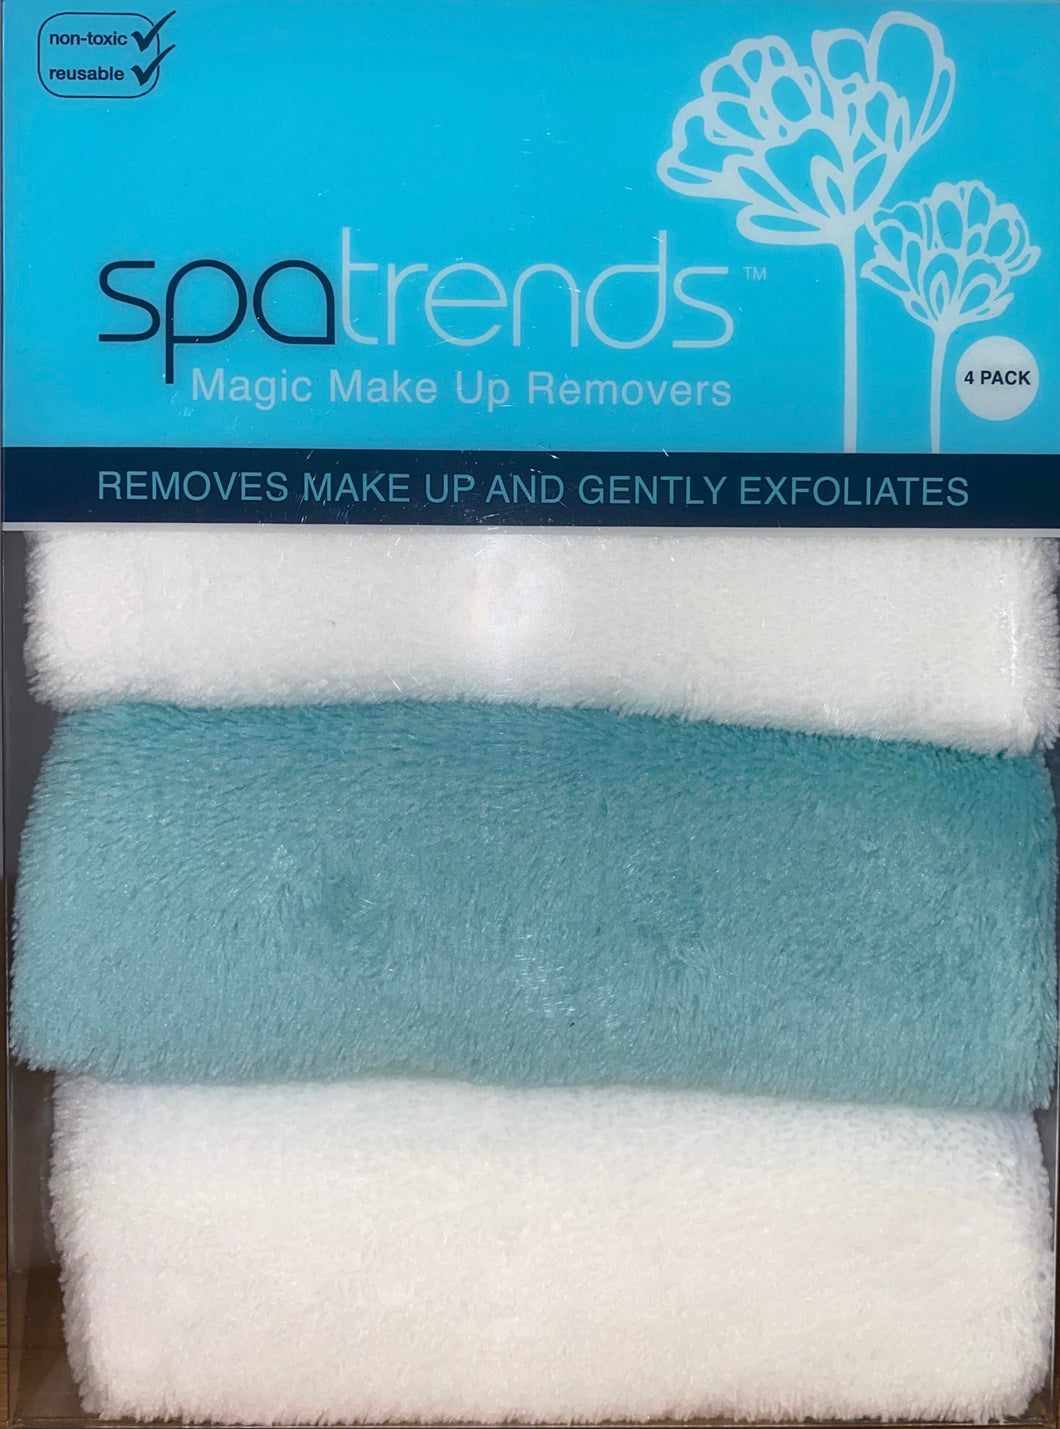 Spa Trends Magic Make Up Removers - Face Washers